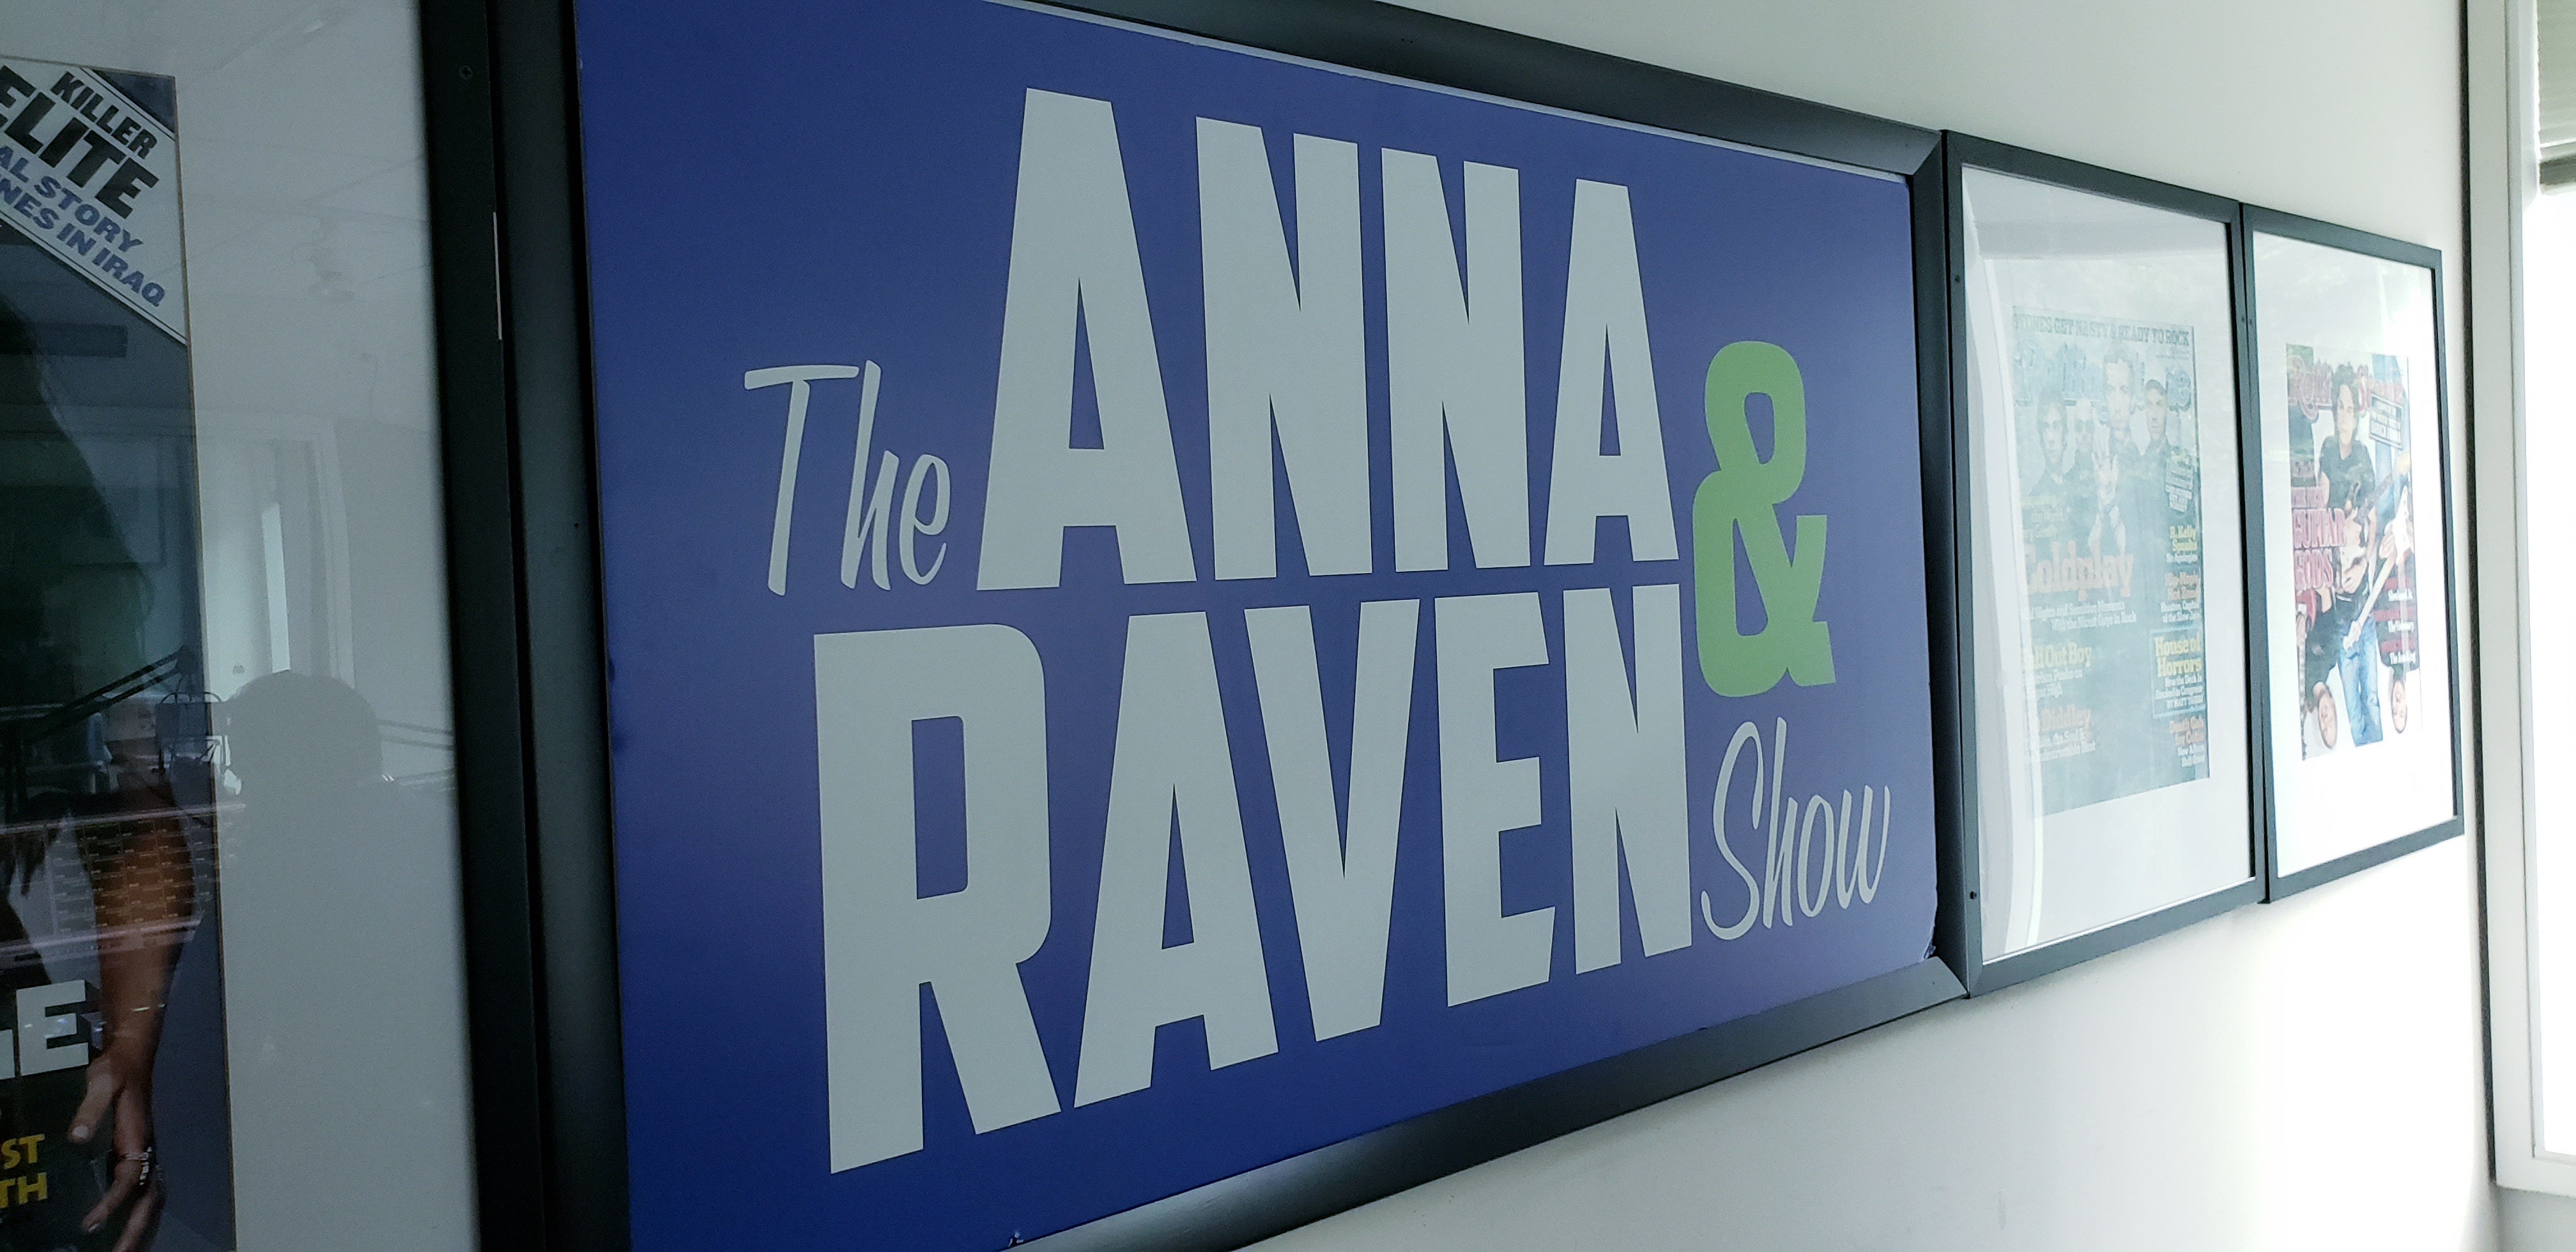 Anna & Raven’s “Would You Rather” Monday!